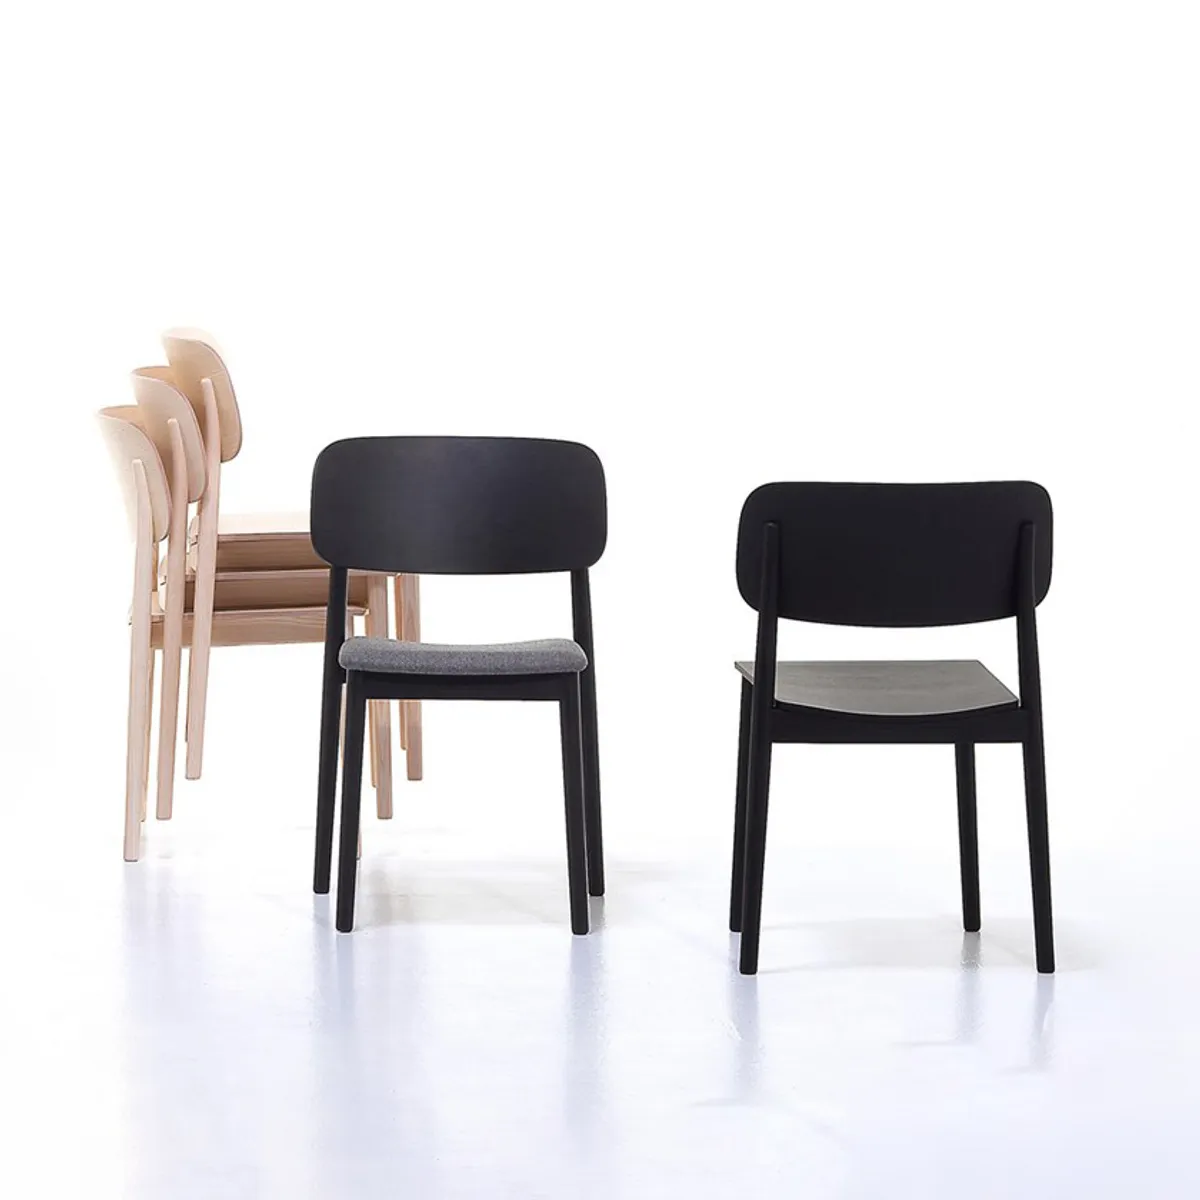 Grado Chair 20208 Inside Out Contracts